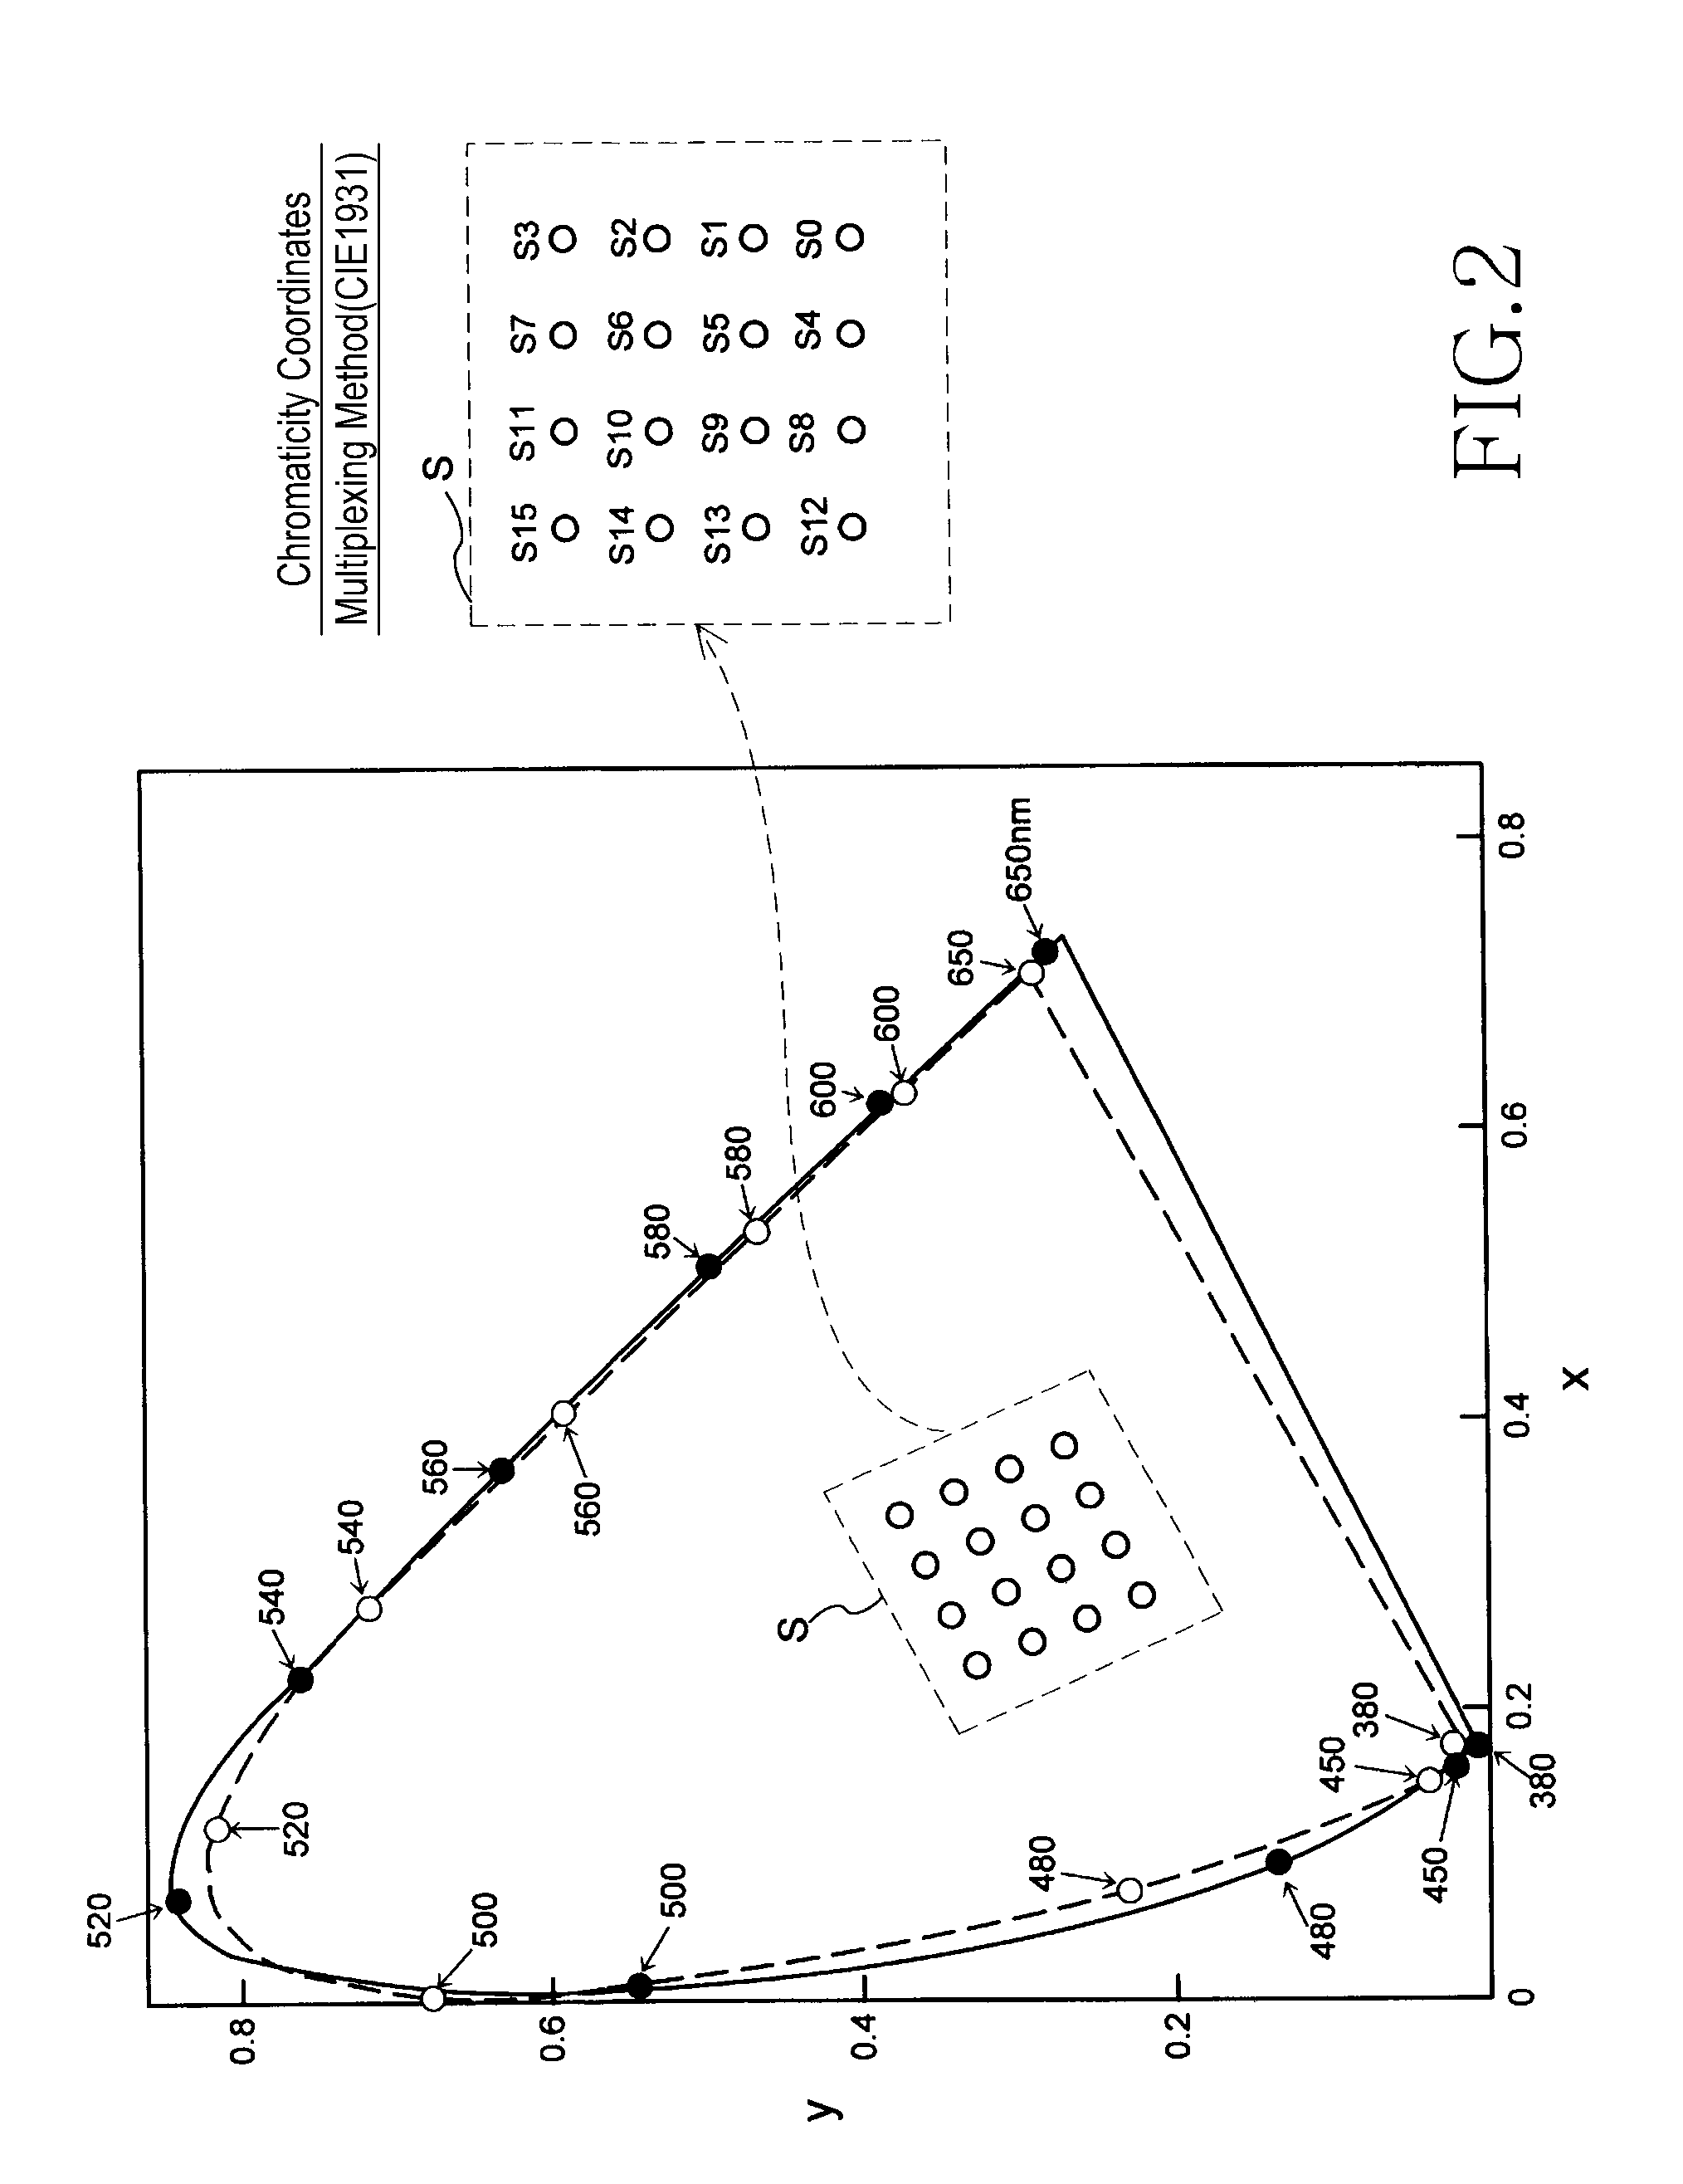 Visible light communication system and method